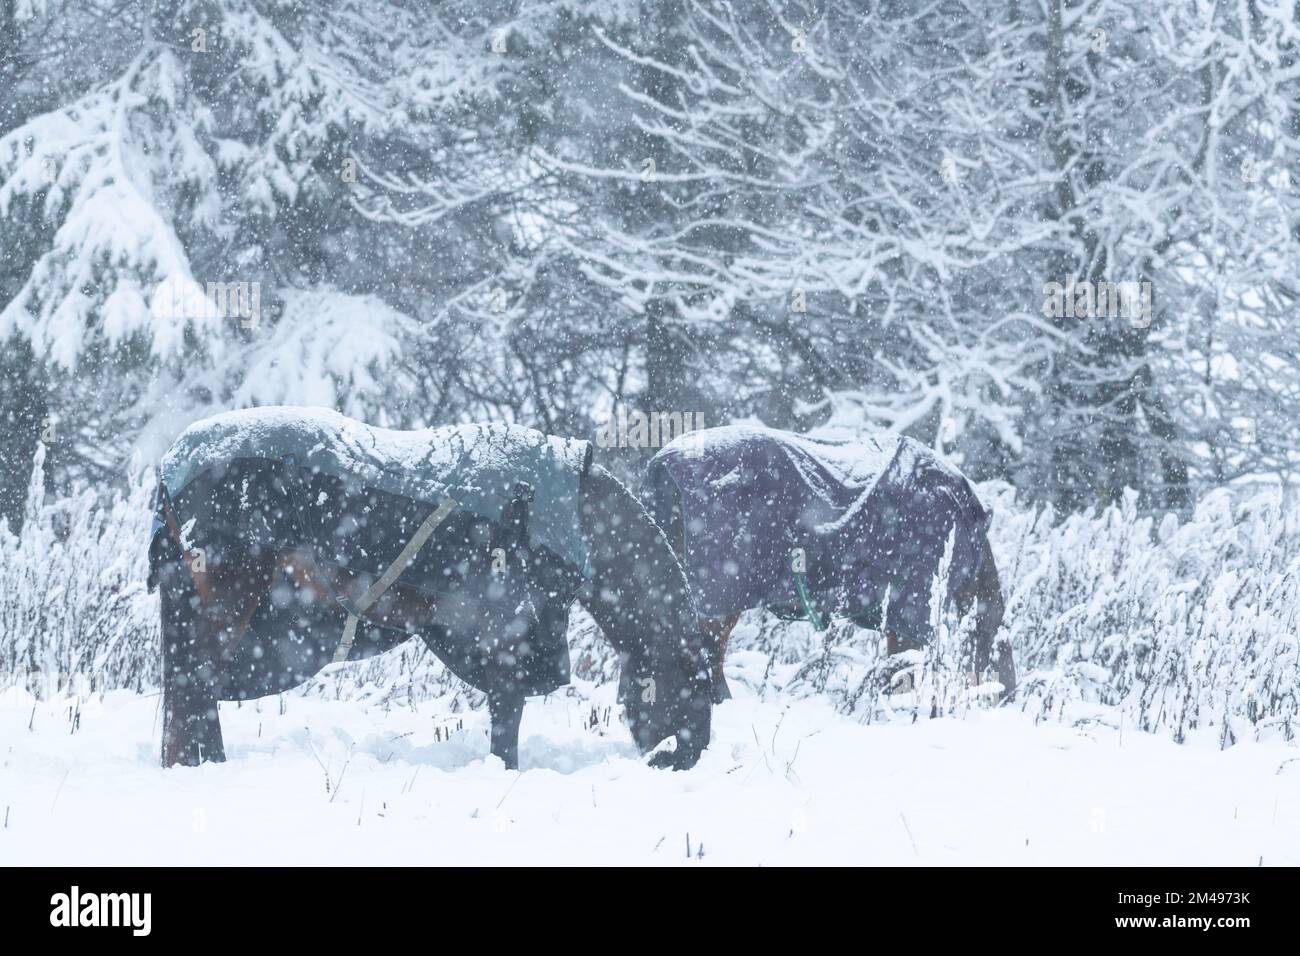 Two Horses with Snow-covered Blankets Looking for Food in Snow When It's Snowing Stock Photo